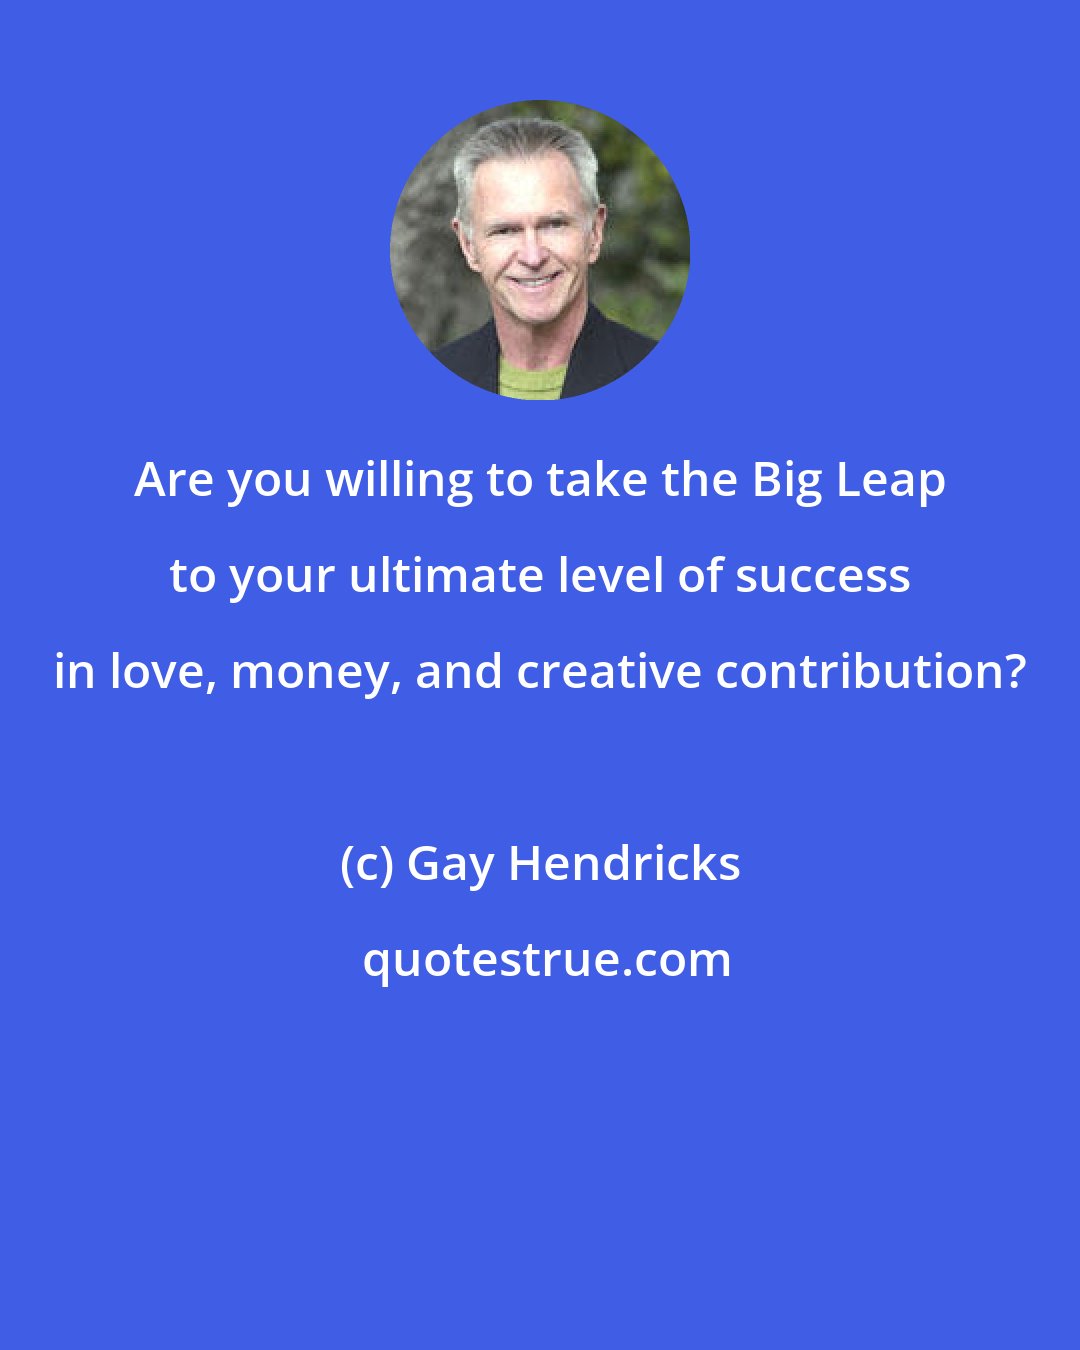 Gay Hendricks: Are you willing to take the Big Leap to your ultimate level of success in love, money, and creative contribution?